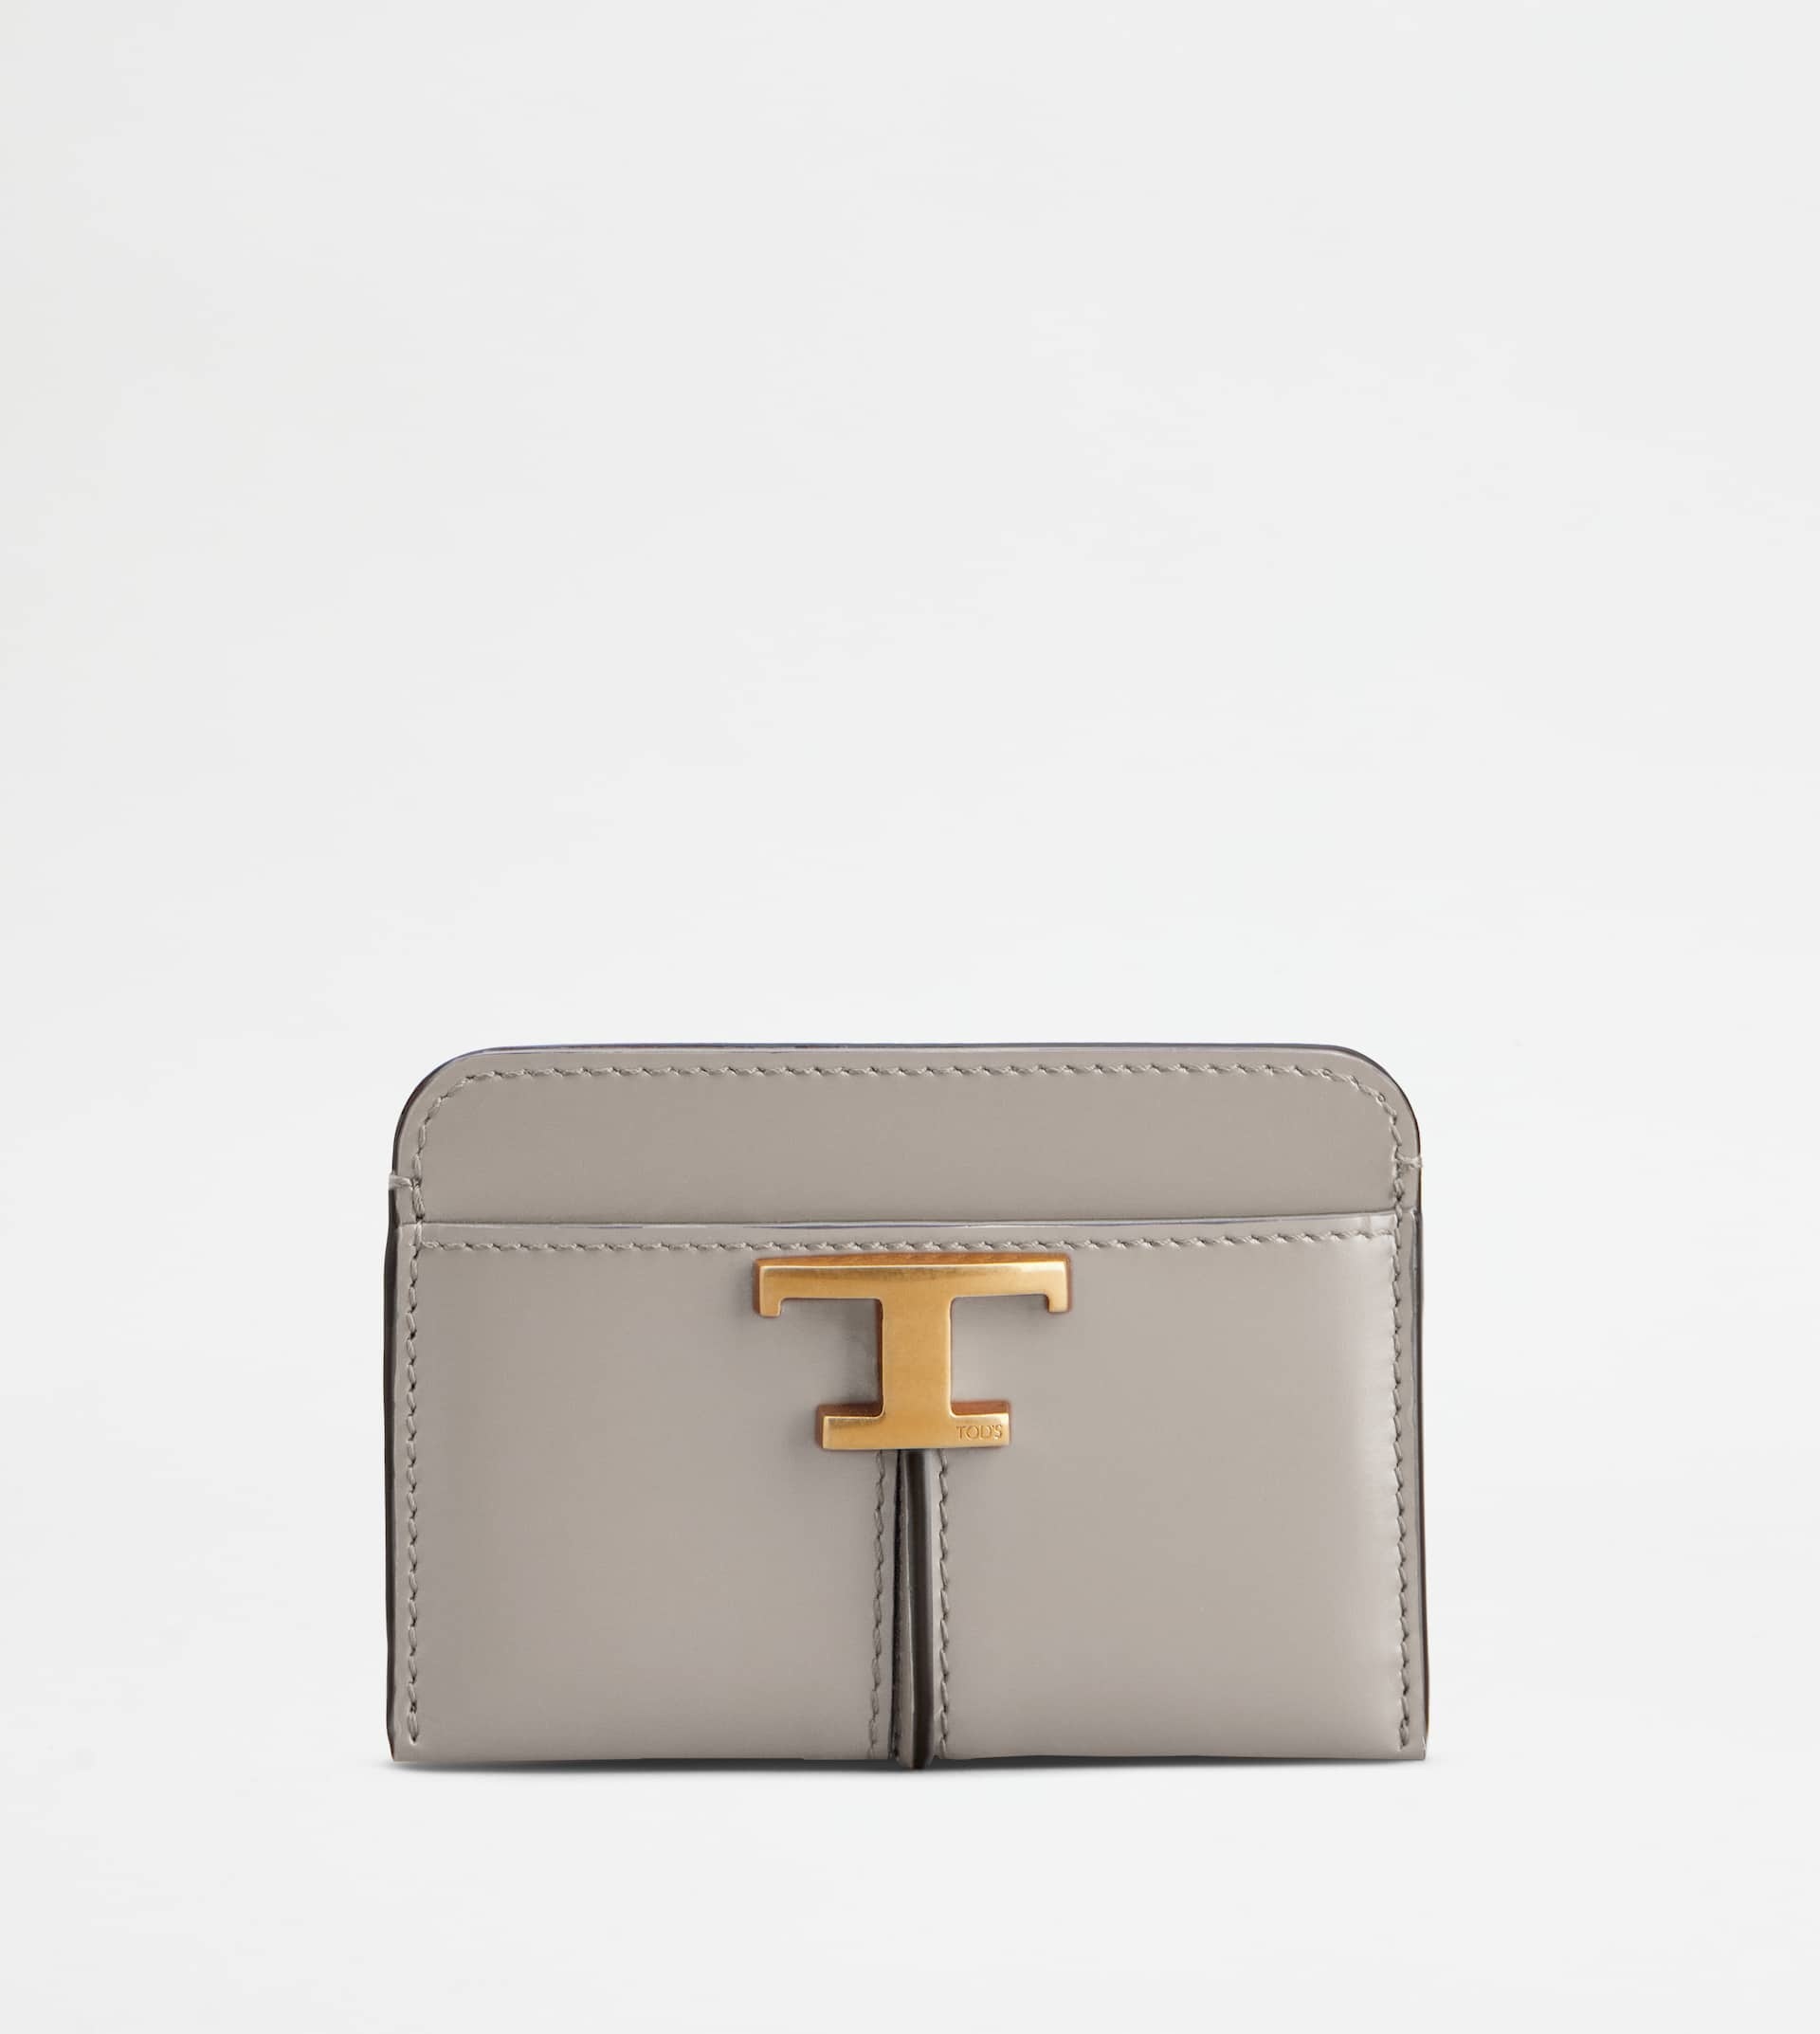 T TIMELESS CREDIT CARD HOLDER IN LEATHER - GREY - 1